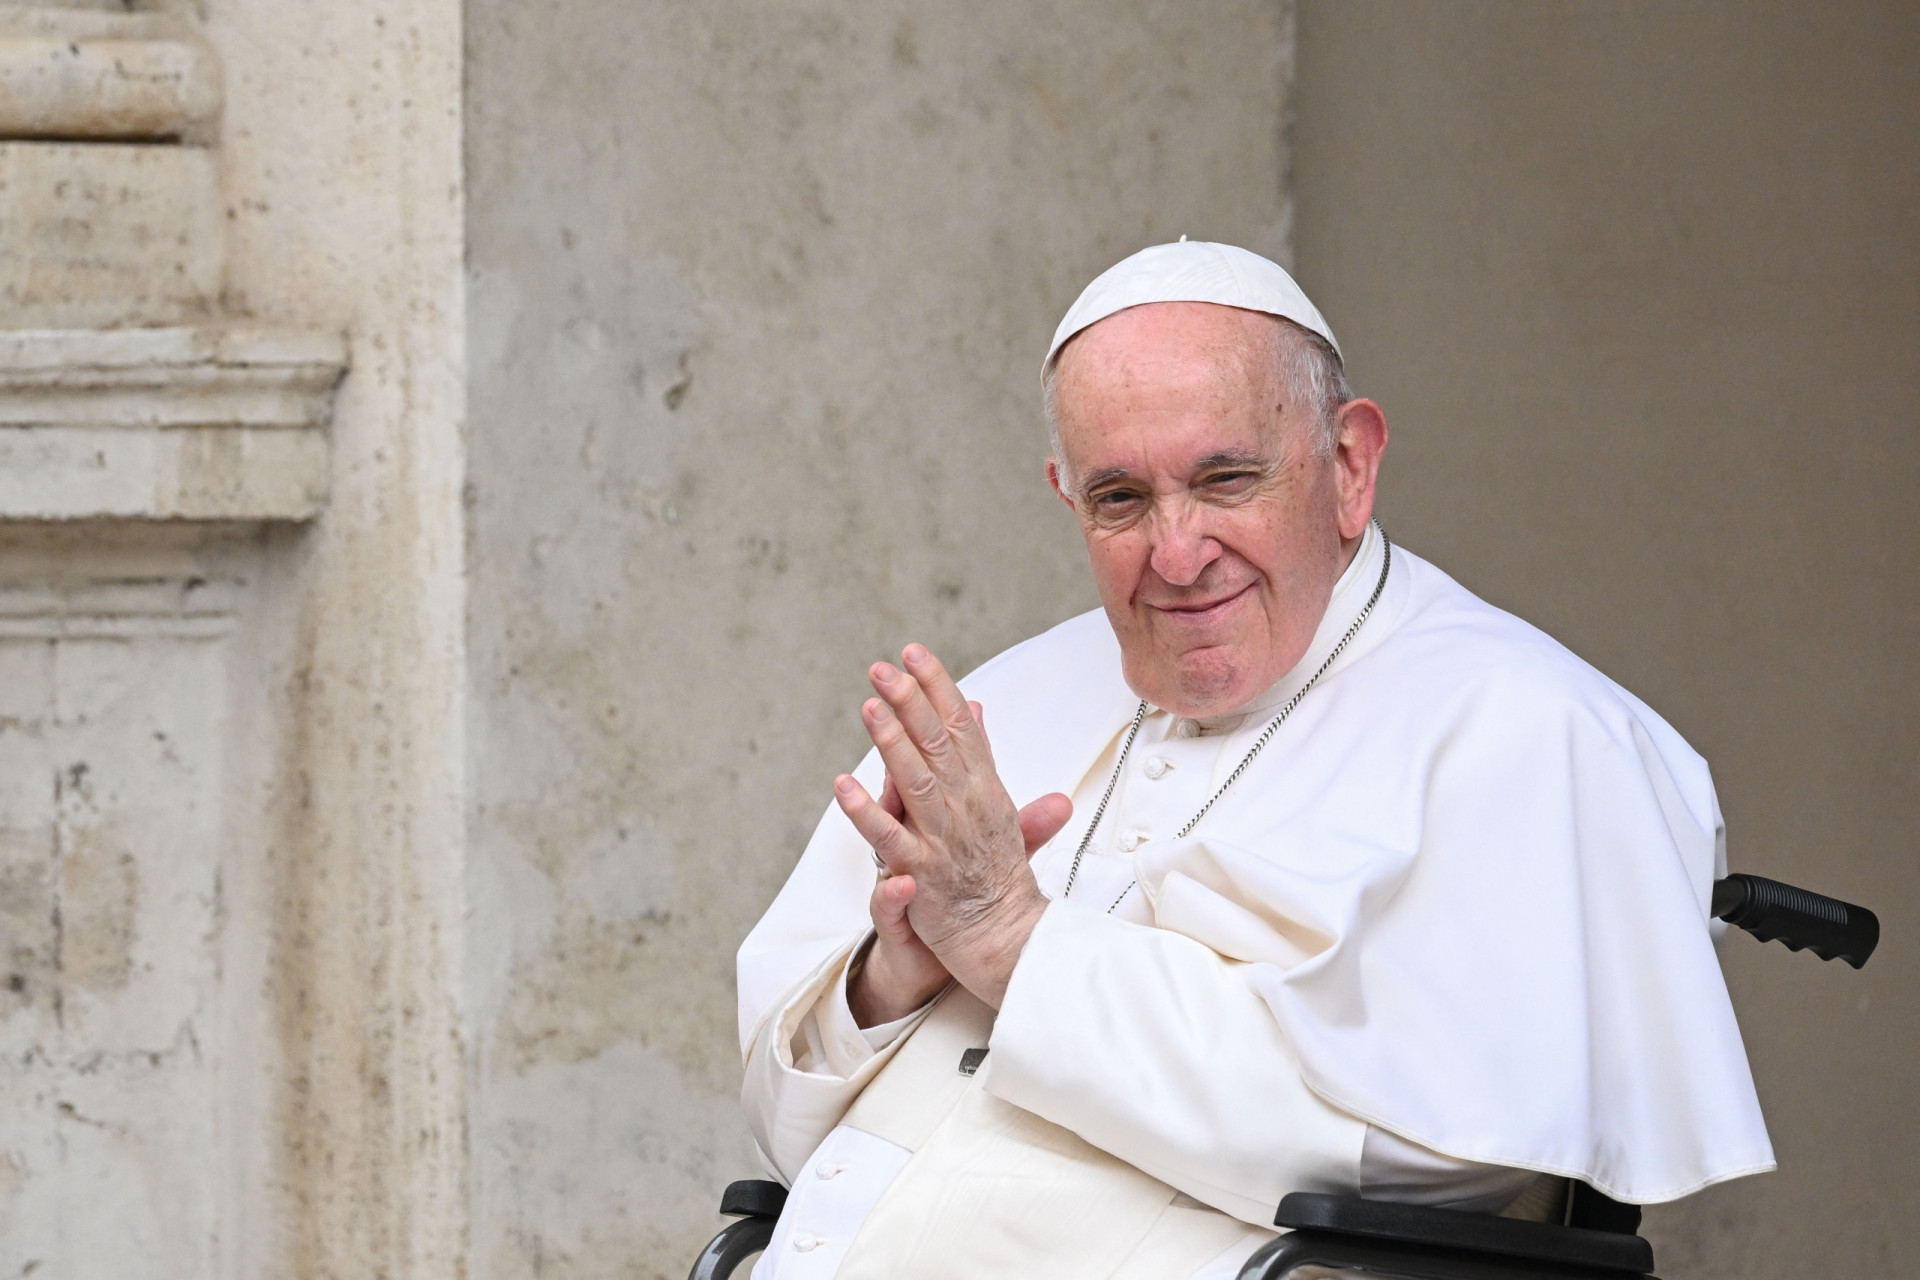 <p>According to the astrologer’s predictions, Pope Francis could soon see a replacement. "Through the death of a very old Pontiff, A Roman of good age will be elected, Of him it will be said that he weakens his see, But long will he sit and in biting activity," he wrote.</p><p>You may also like:<a href="https://www.starsinsider.com/n/483519?utm_source=msn.com&utm_medium=display&utm_campaign=referral_description&utm_content=638526en-us"> Disturbing finds in celebrity autopsies</a></p>